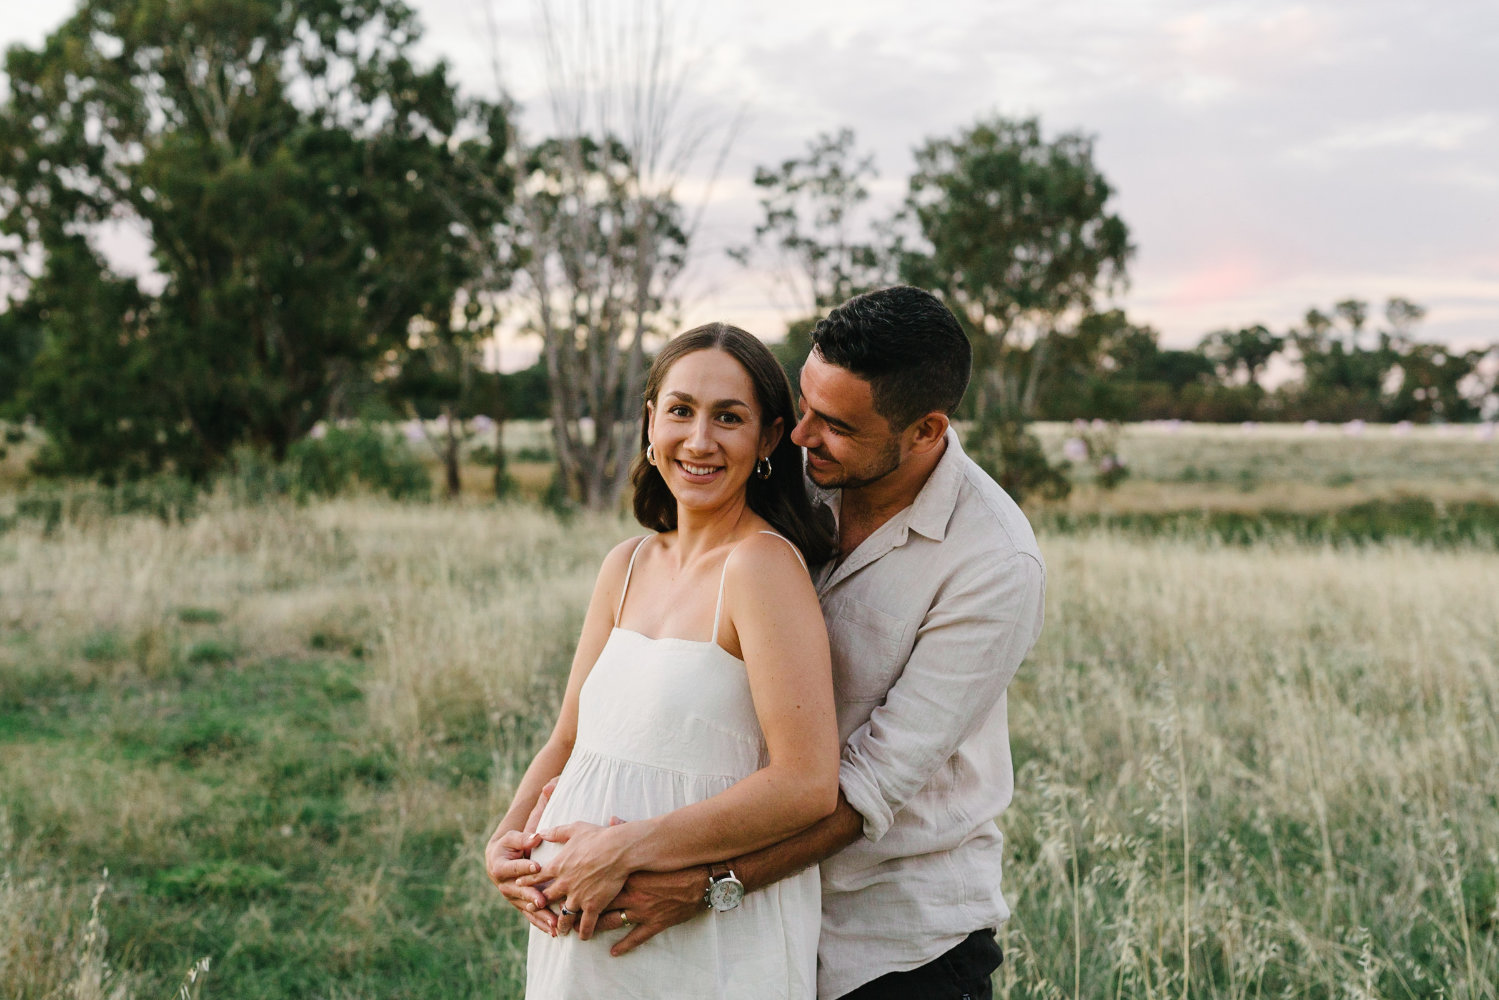 Outdoor Maternity Photoshoot North Melbourne Ascot Vale Madeleine Chiller Photography Yvette and Mark 7